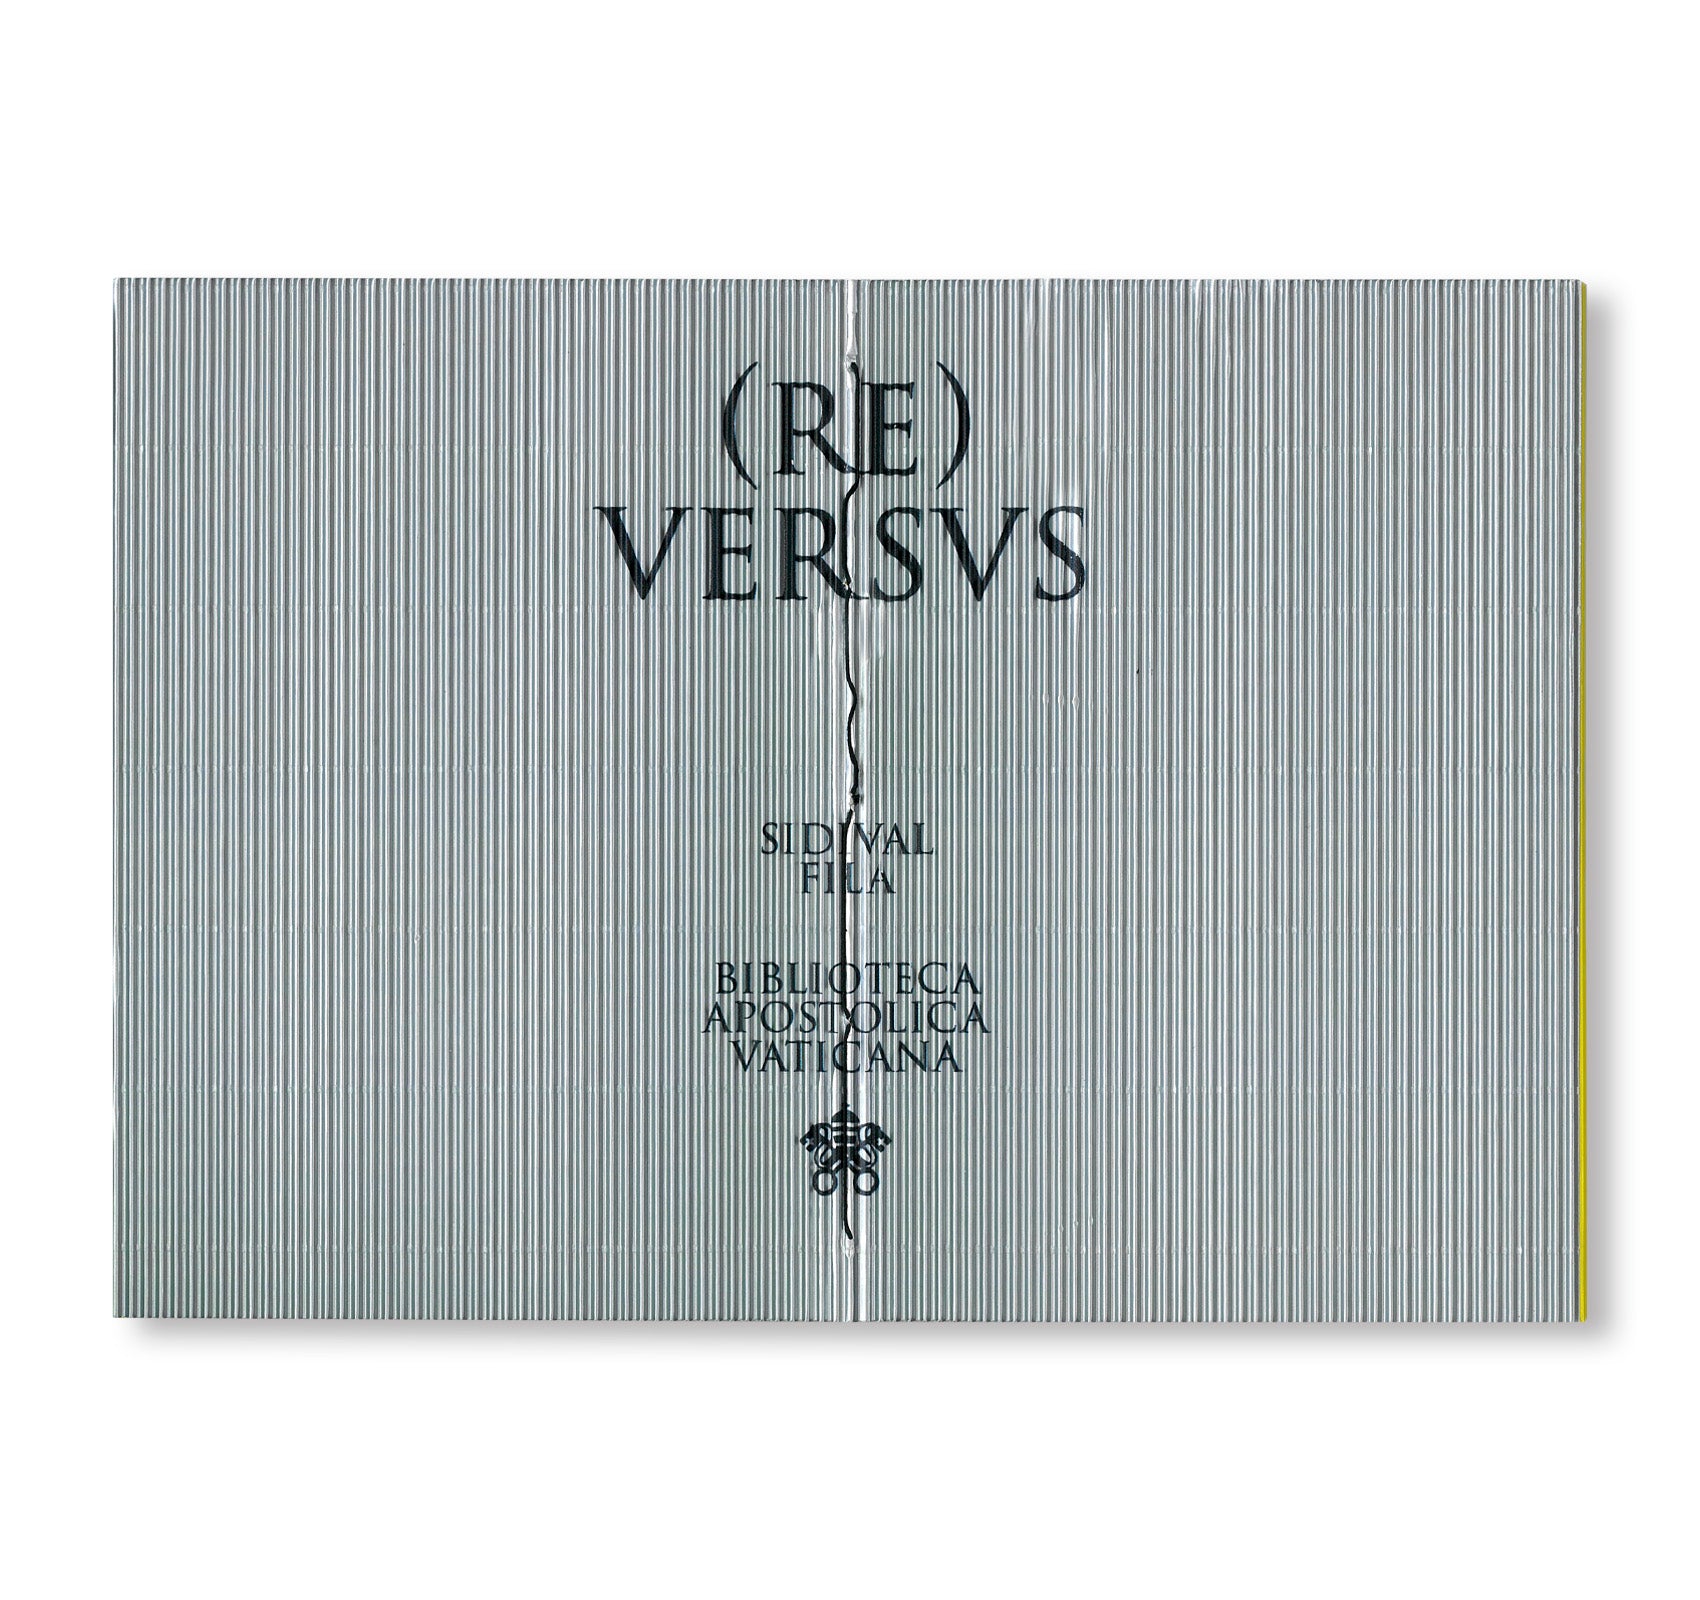 (RE)VERSVS - REUSE AND REDEMPTION IN THE PATRIMONY OF THE VATICAN LIBRARY AND IN THE ART OF SIDIVAL FILA - ROM, BIBLIOTECA APOSTOLICA VATICANA